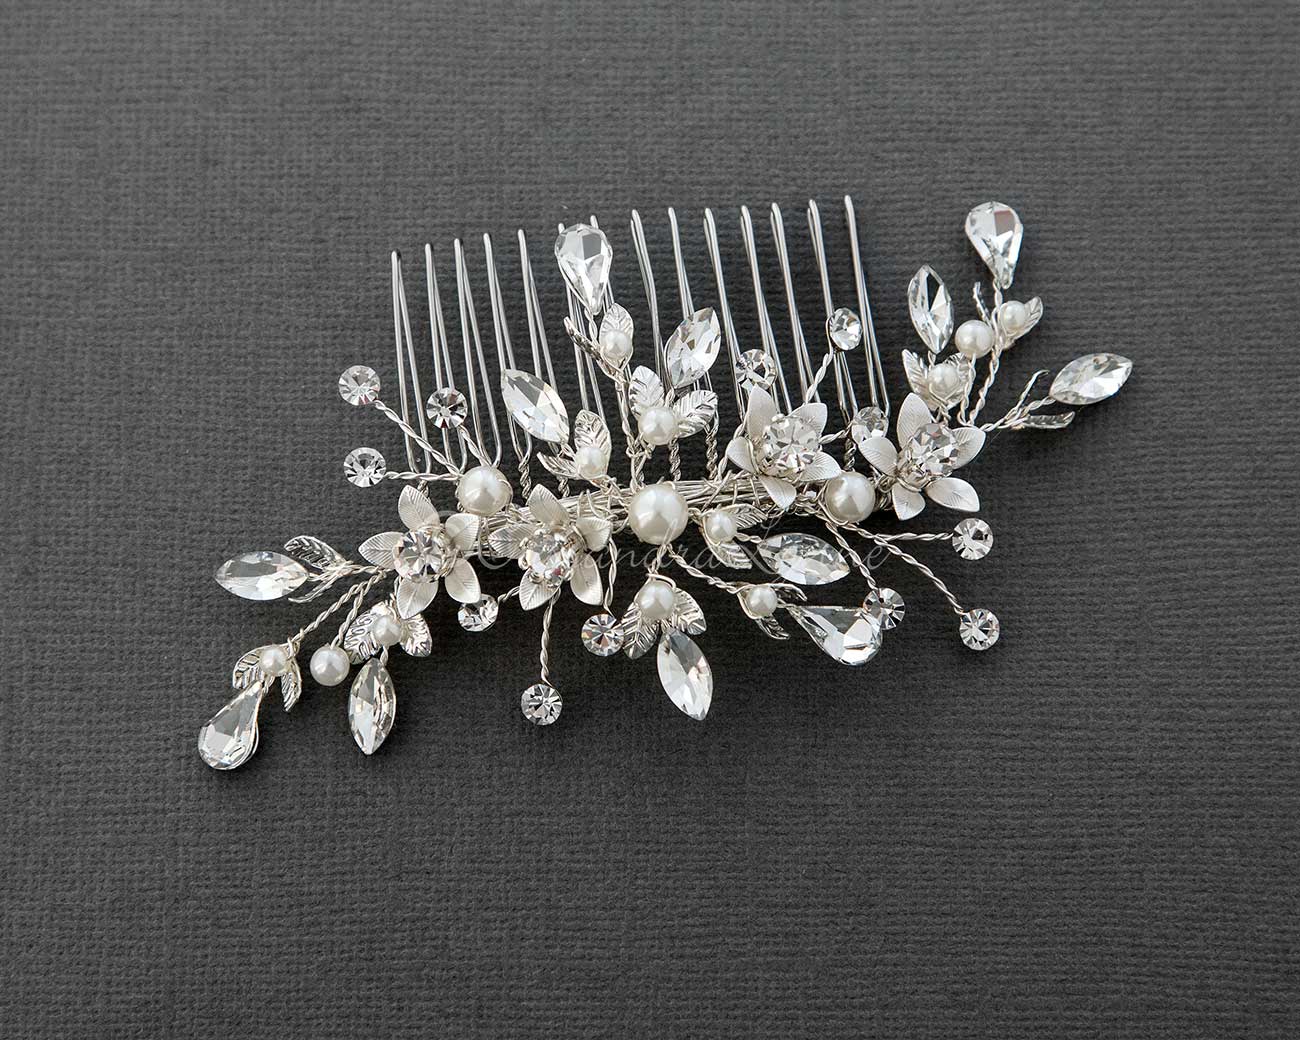 Crystal and Pearl Wedding Comb - Cassandra Lynne